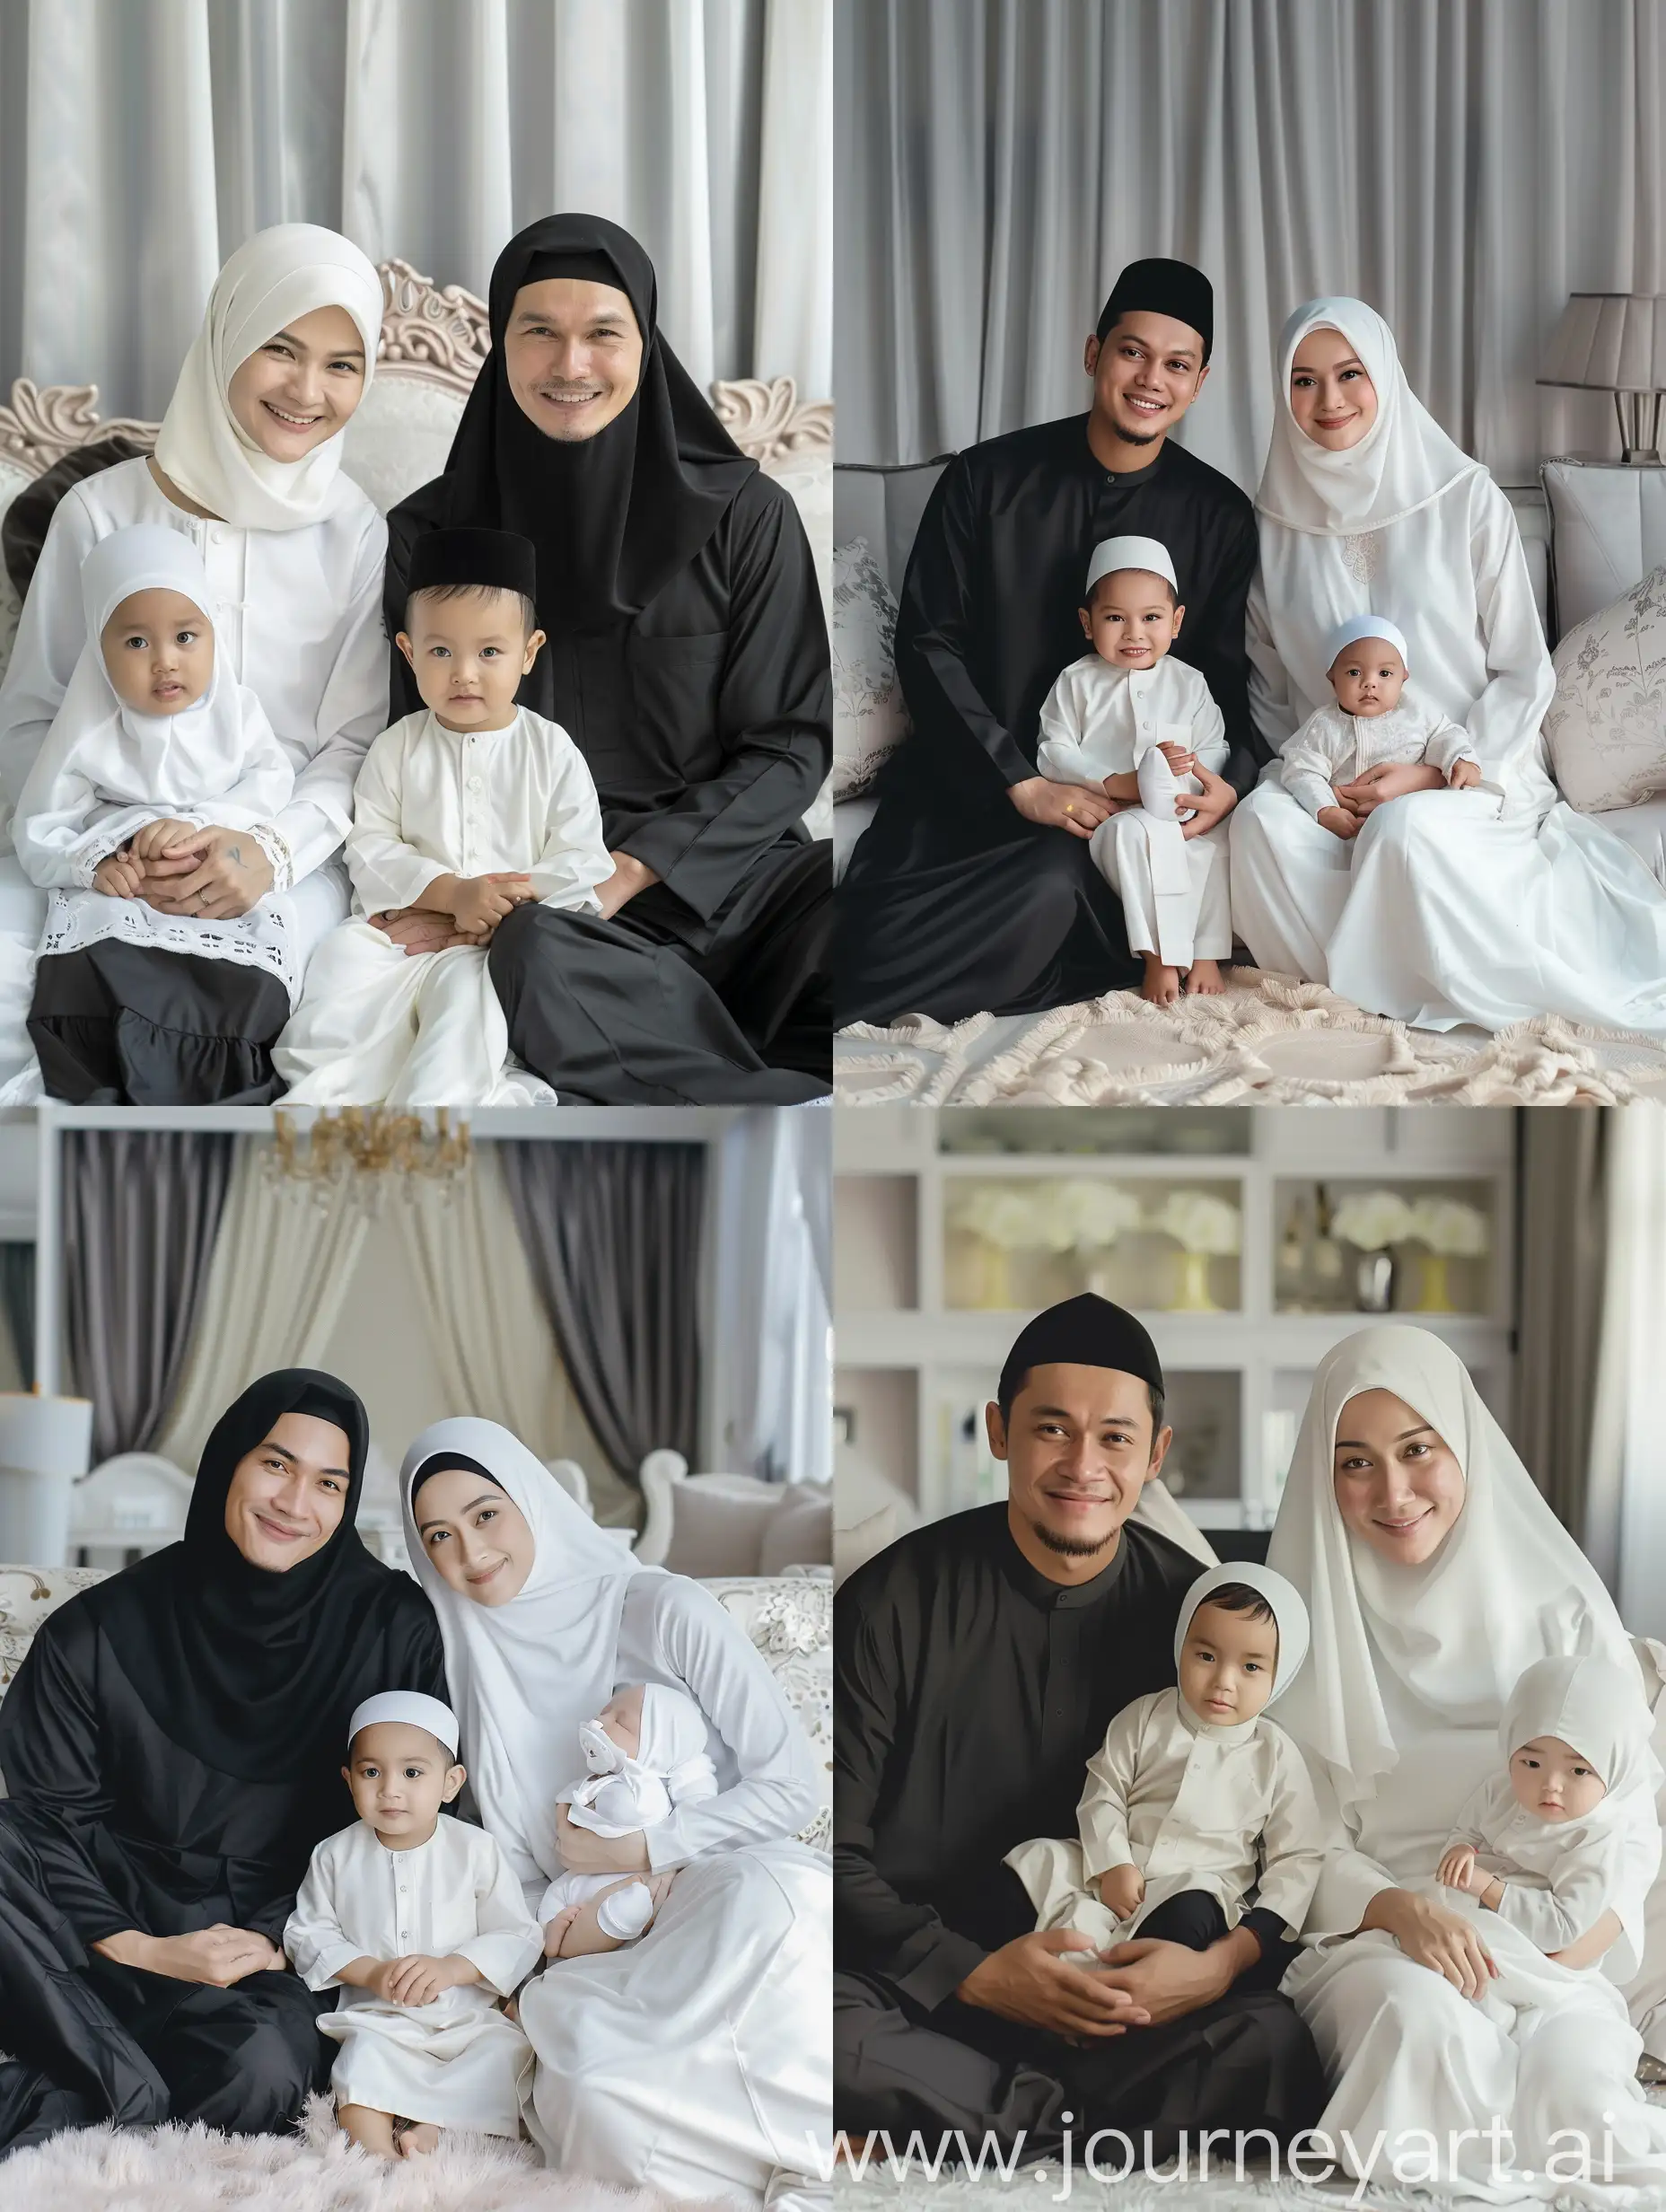 Indonesian-Family-Portrait-Parents-and-Children-in-Traditional-Muslim-Attire-Smiling-Together